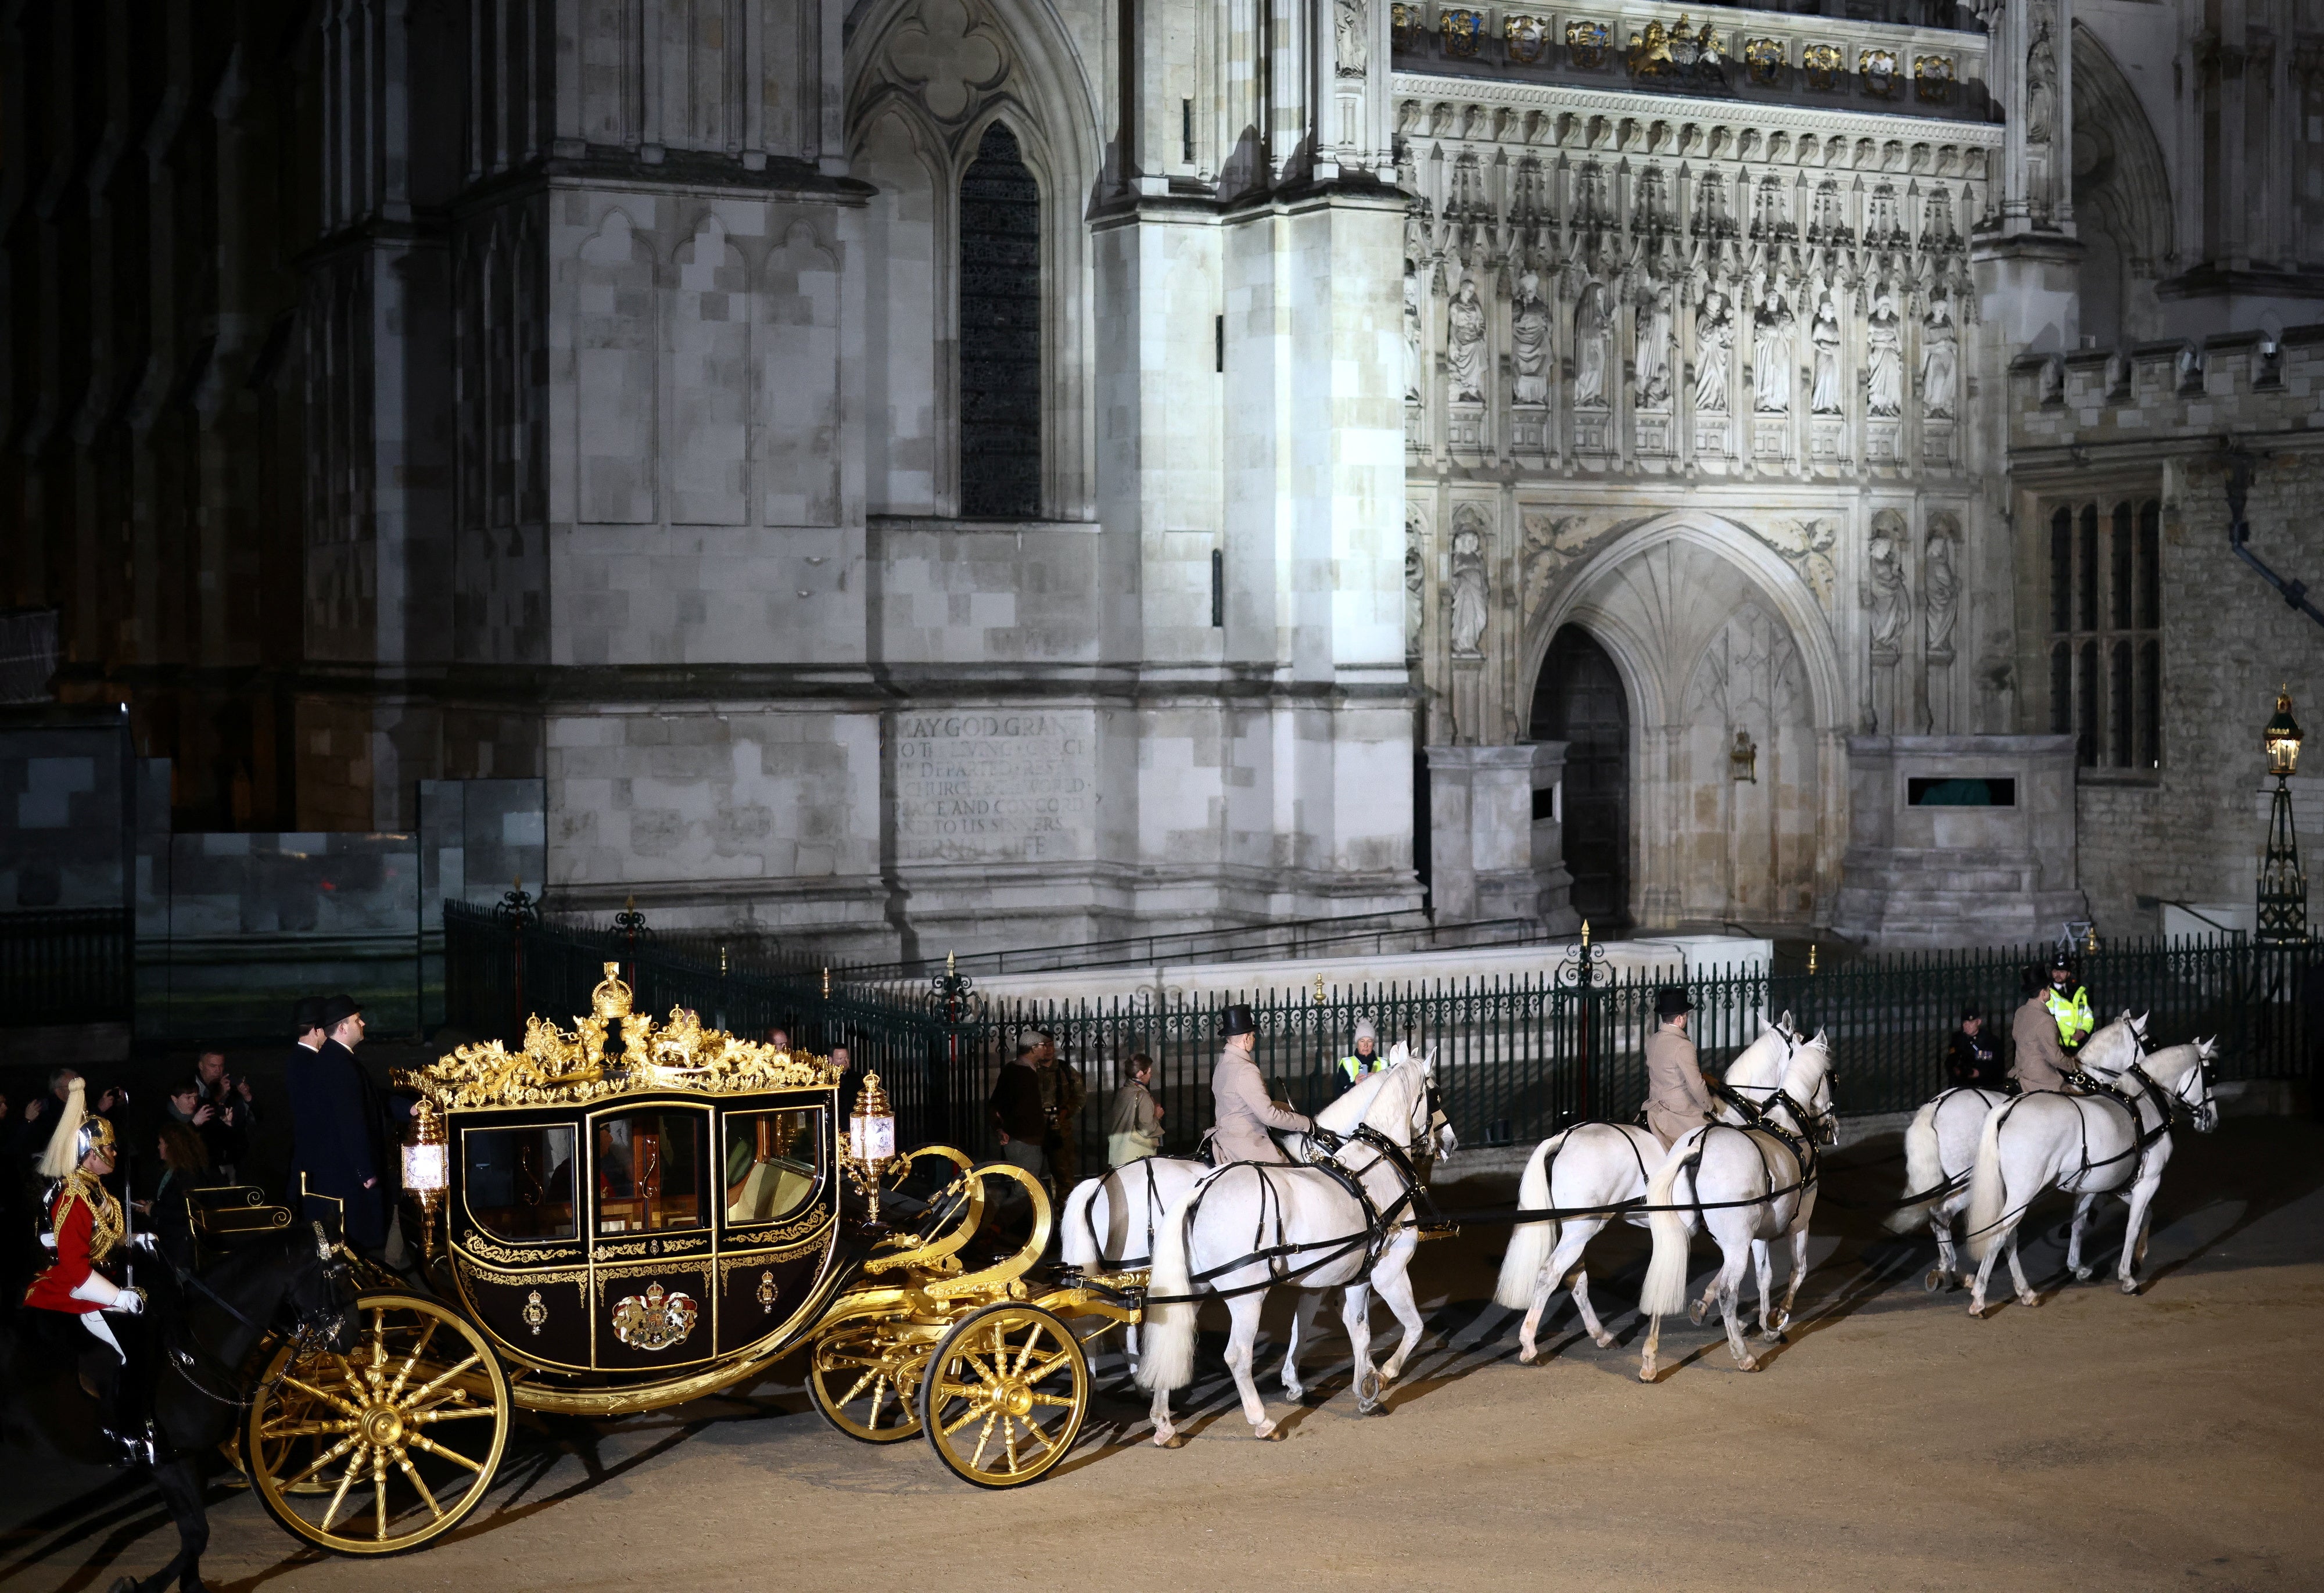 The Diamond Jubilee Coach is ridden alongside members of the military during a full overnight dress rehearsal of the coronation